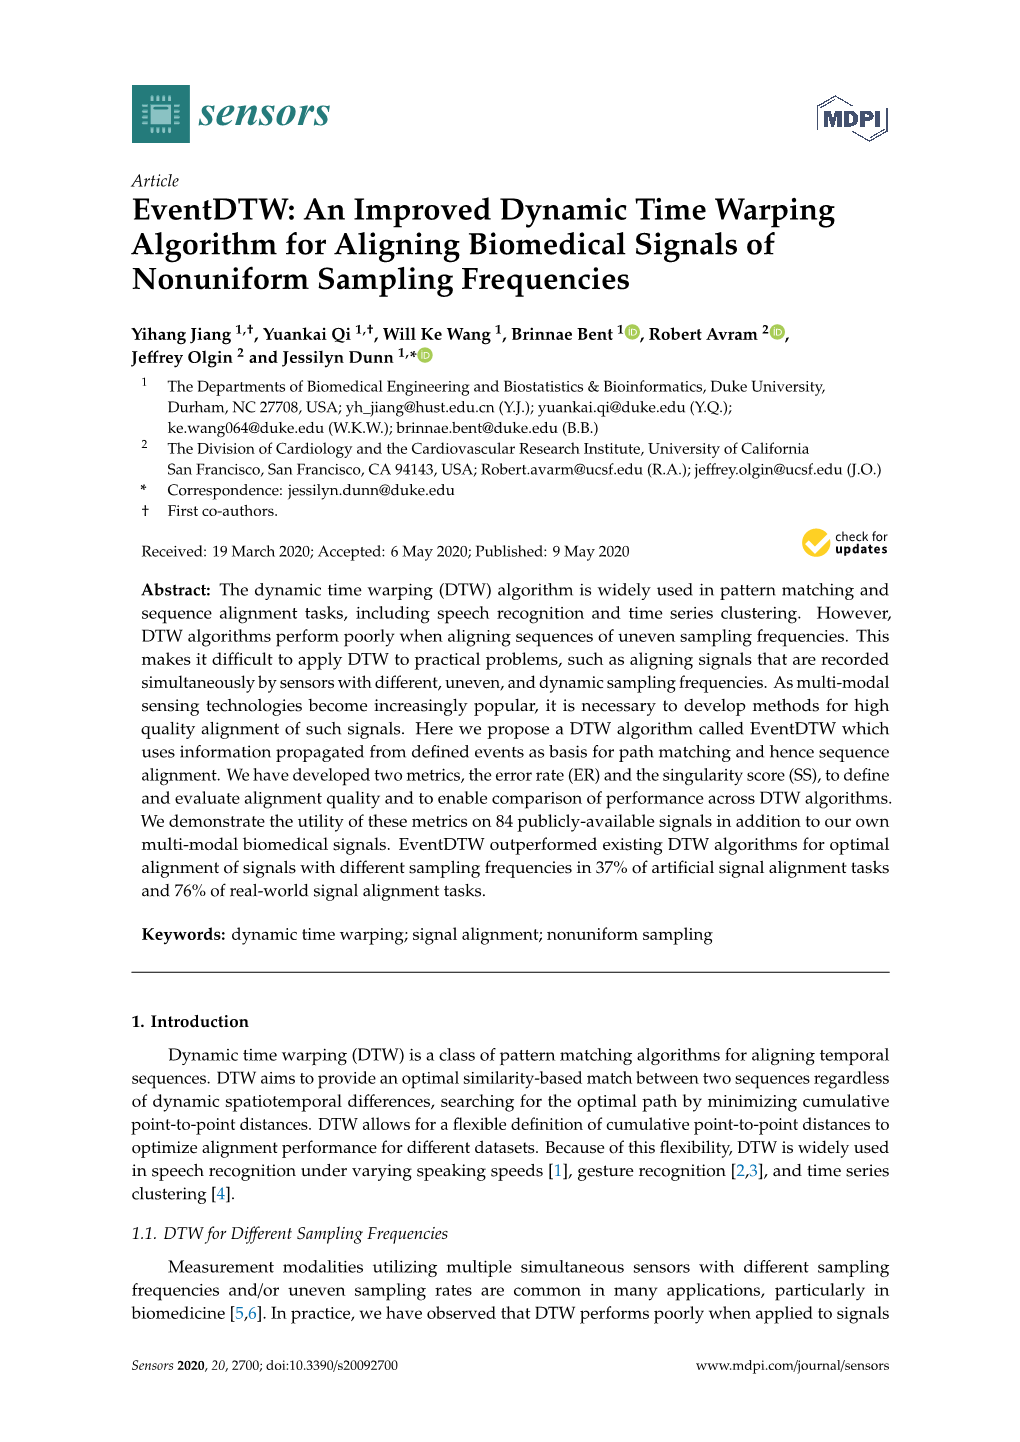 Eventdtw: an Improved Dynamic Time Warping Algorithm for Aligning Biomedical Signals of Nonuniform Sampling Frequencies